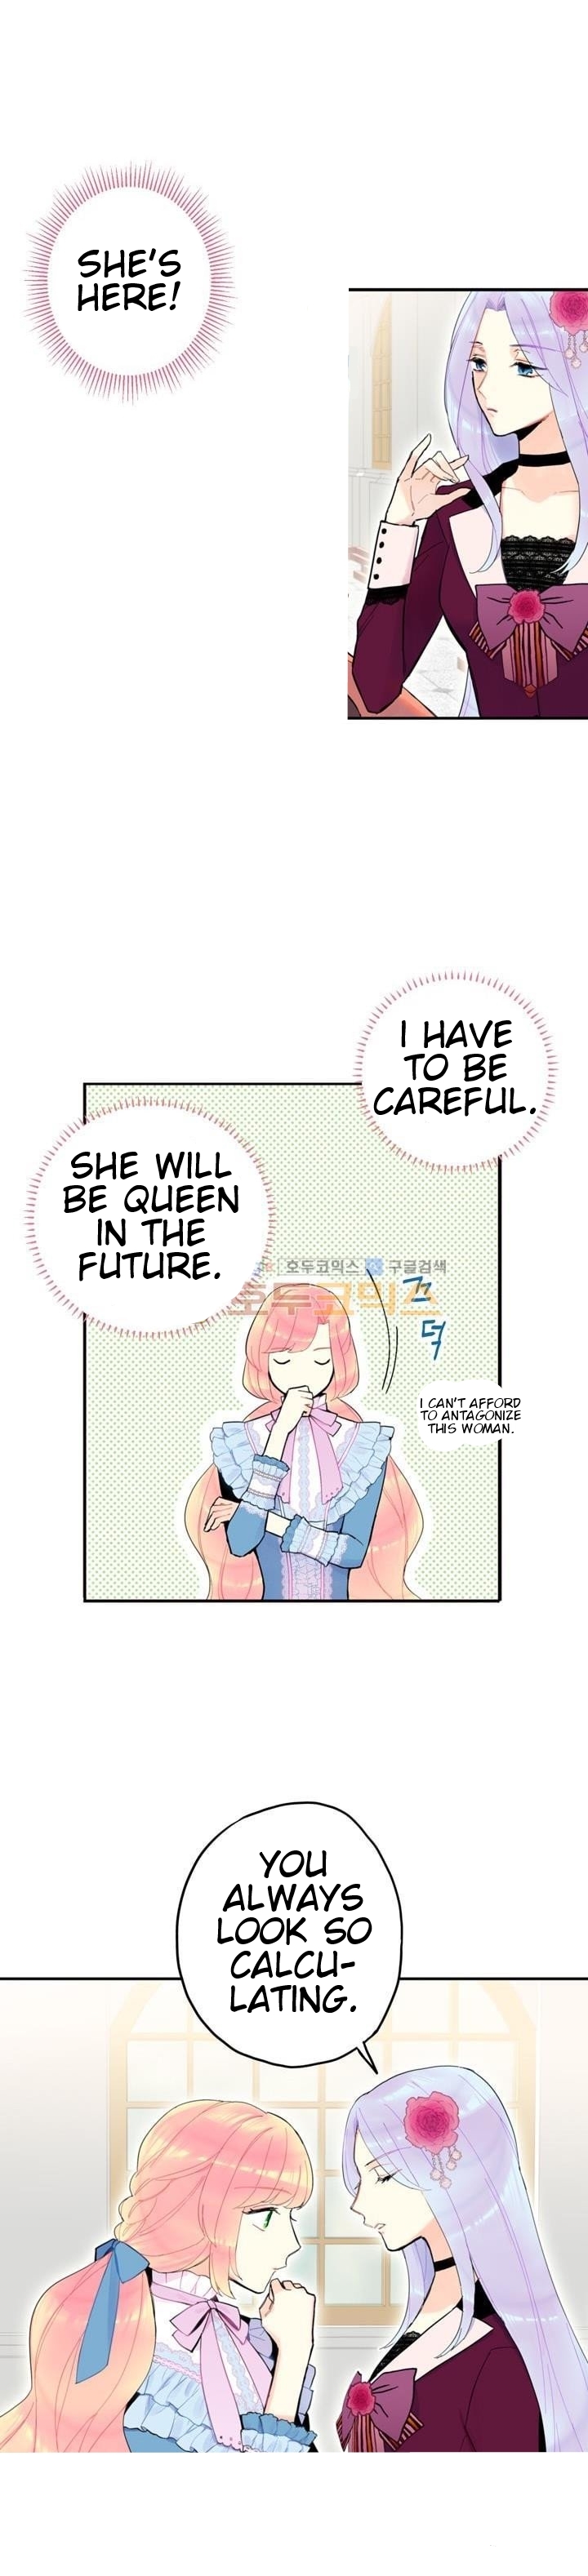 April Fool's Collection 2019 Ch. 17 Survive as the Hero's Wife Yuri Route (ch 17)